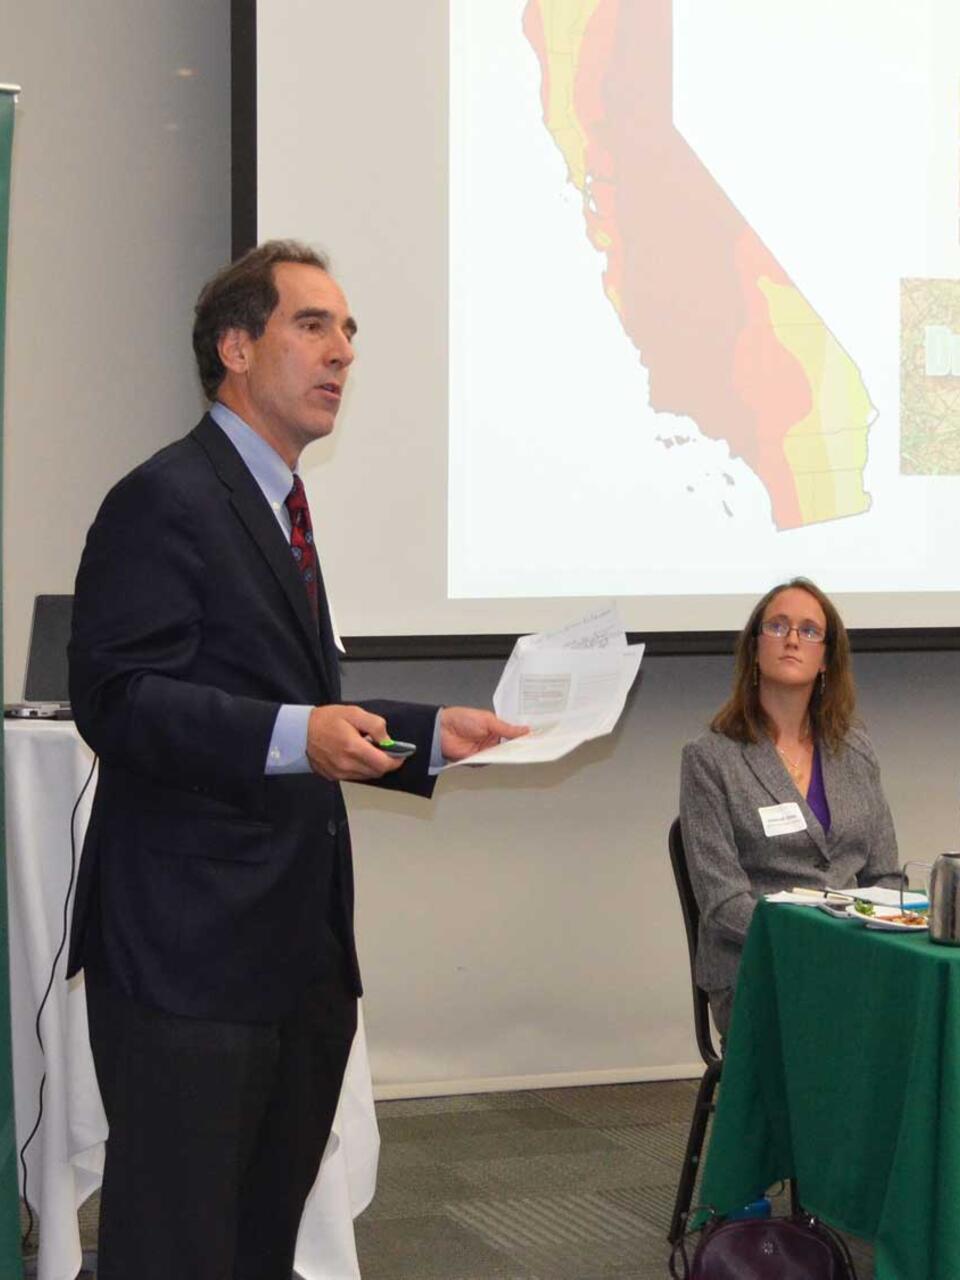 David Sandino, chief counsel for the California Department of Water Resources, presenting at the Oct. 28 event co-hosted by the USF Environmental Law Students and Alumni Society and Environmental Law Society